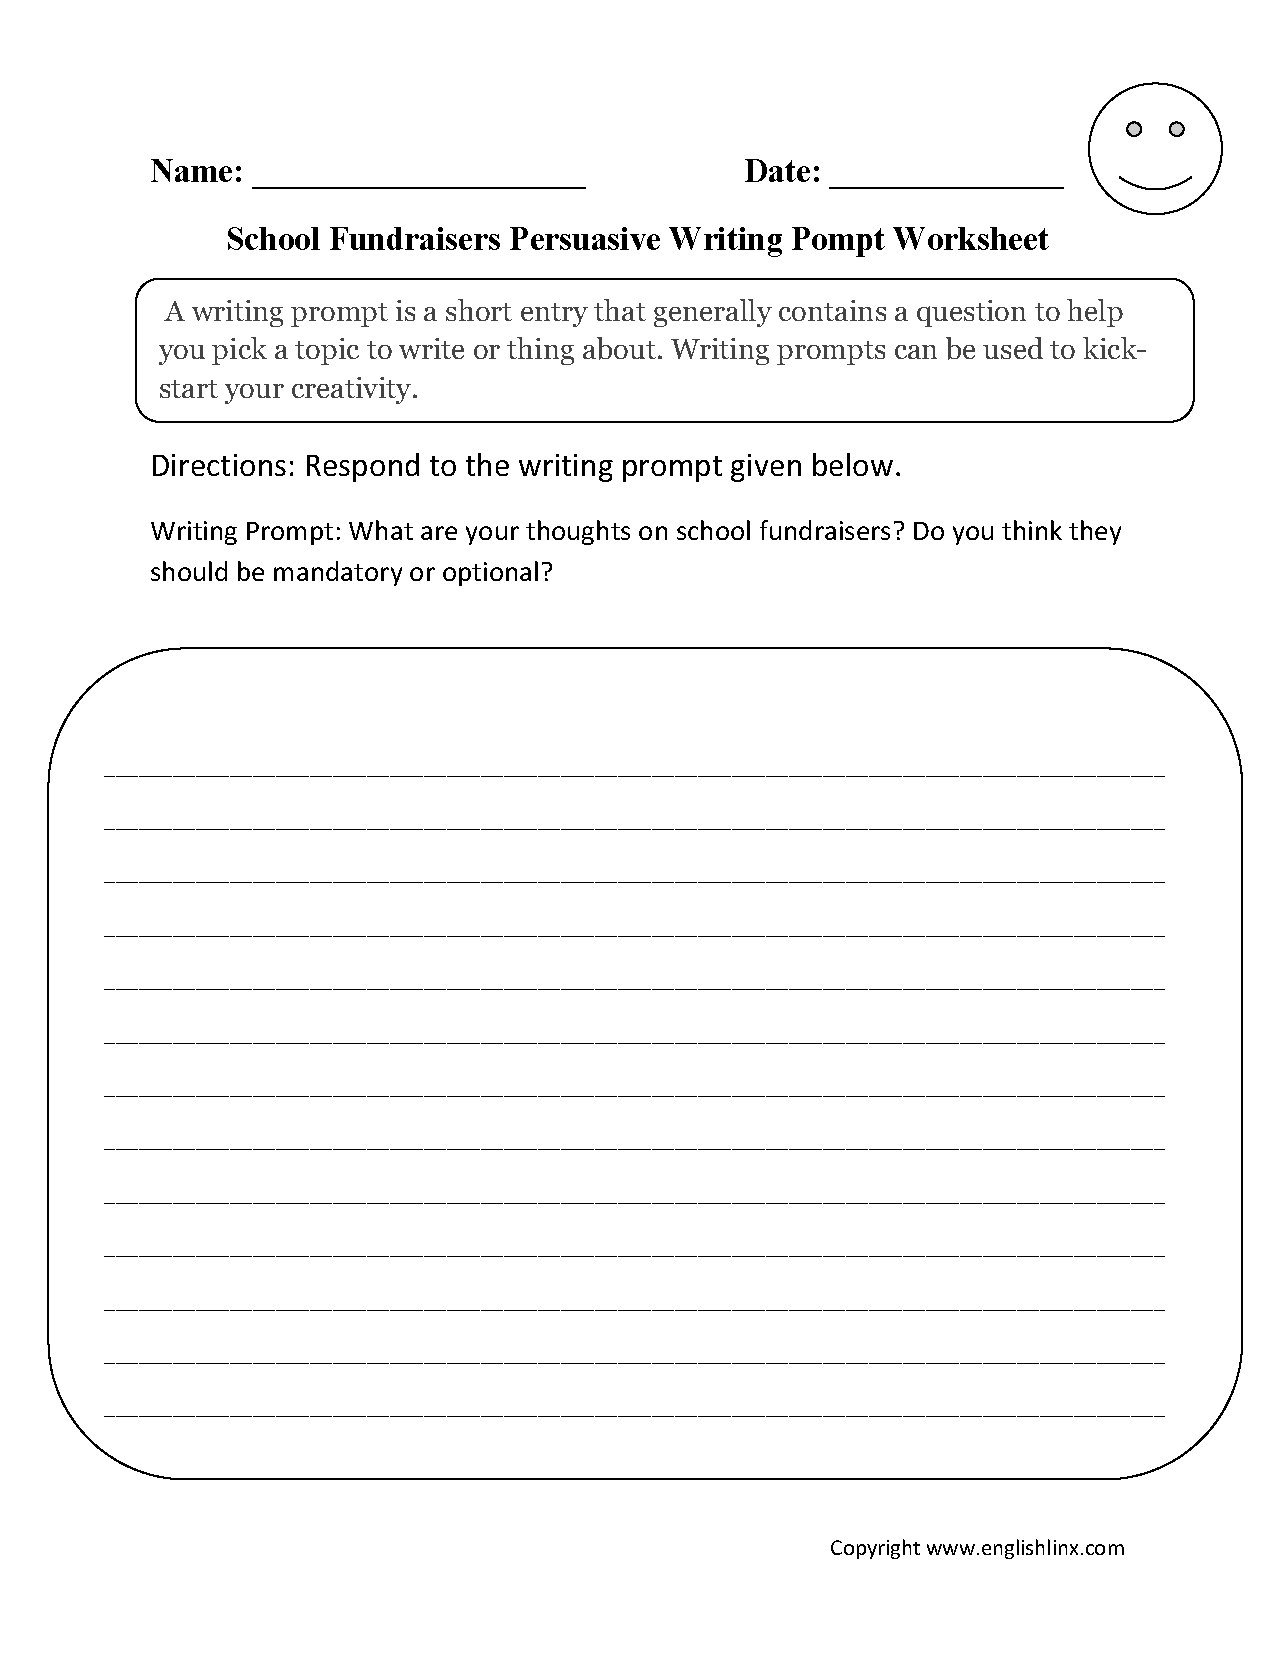 16-best-images-of-4th-grade-writing-prompts-worksheets-4th-grade